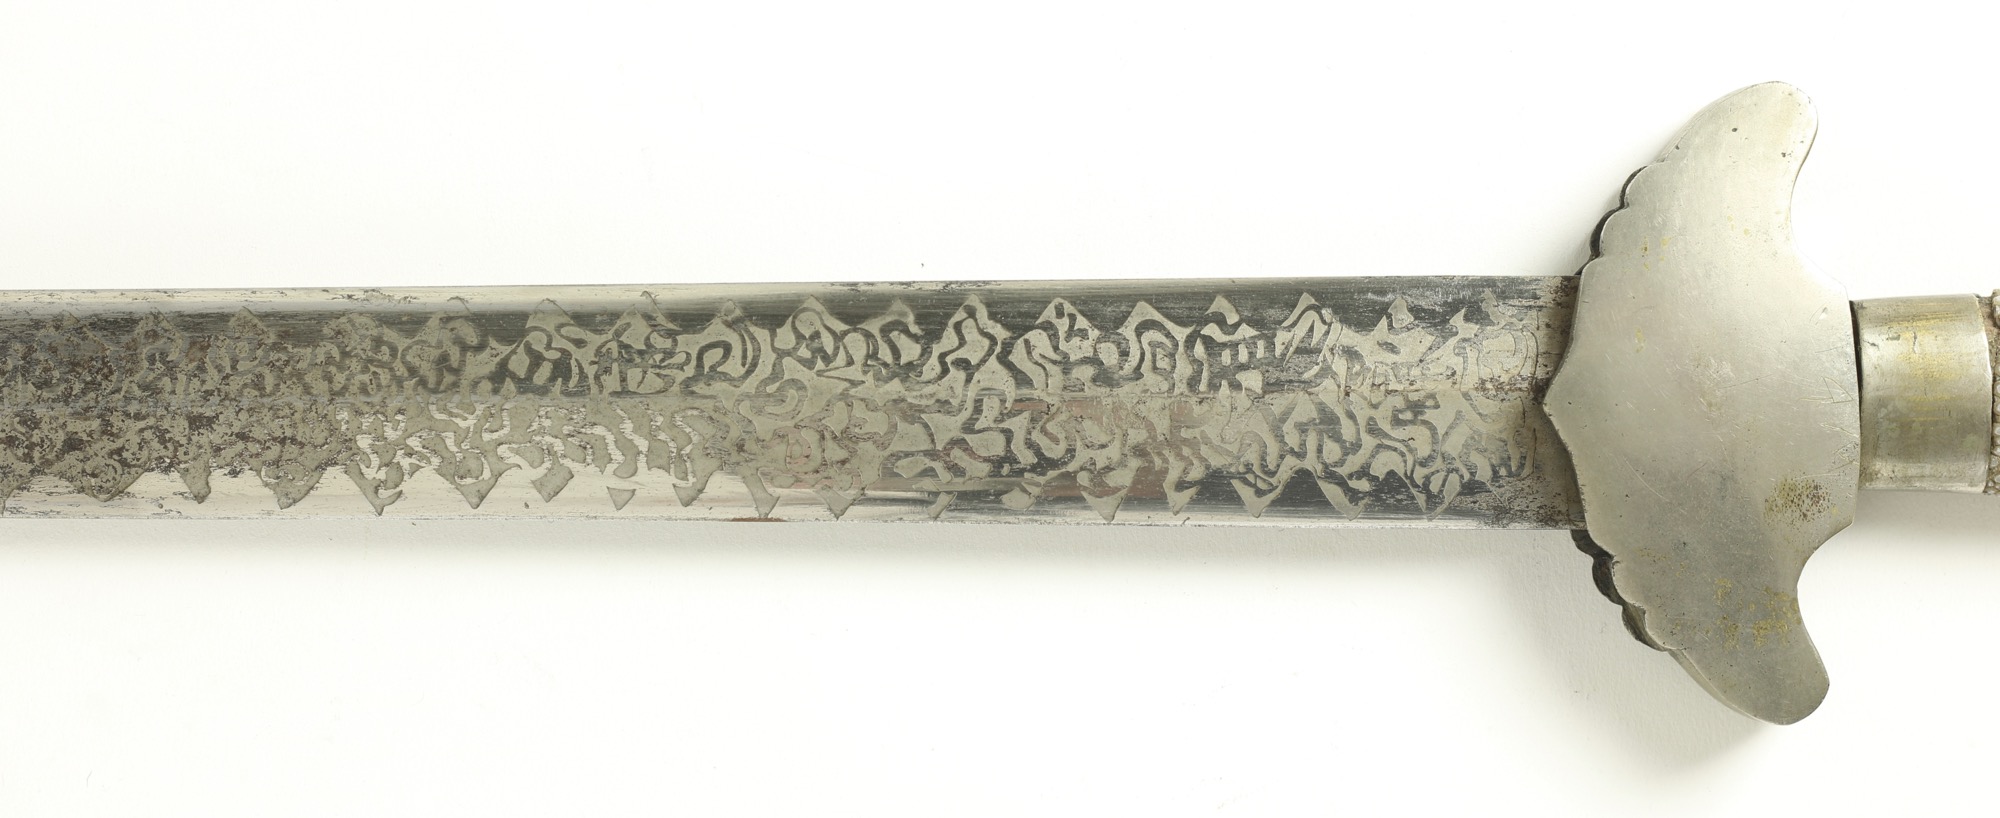 An antique Chinese jian from the Republican period.